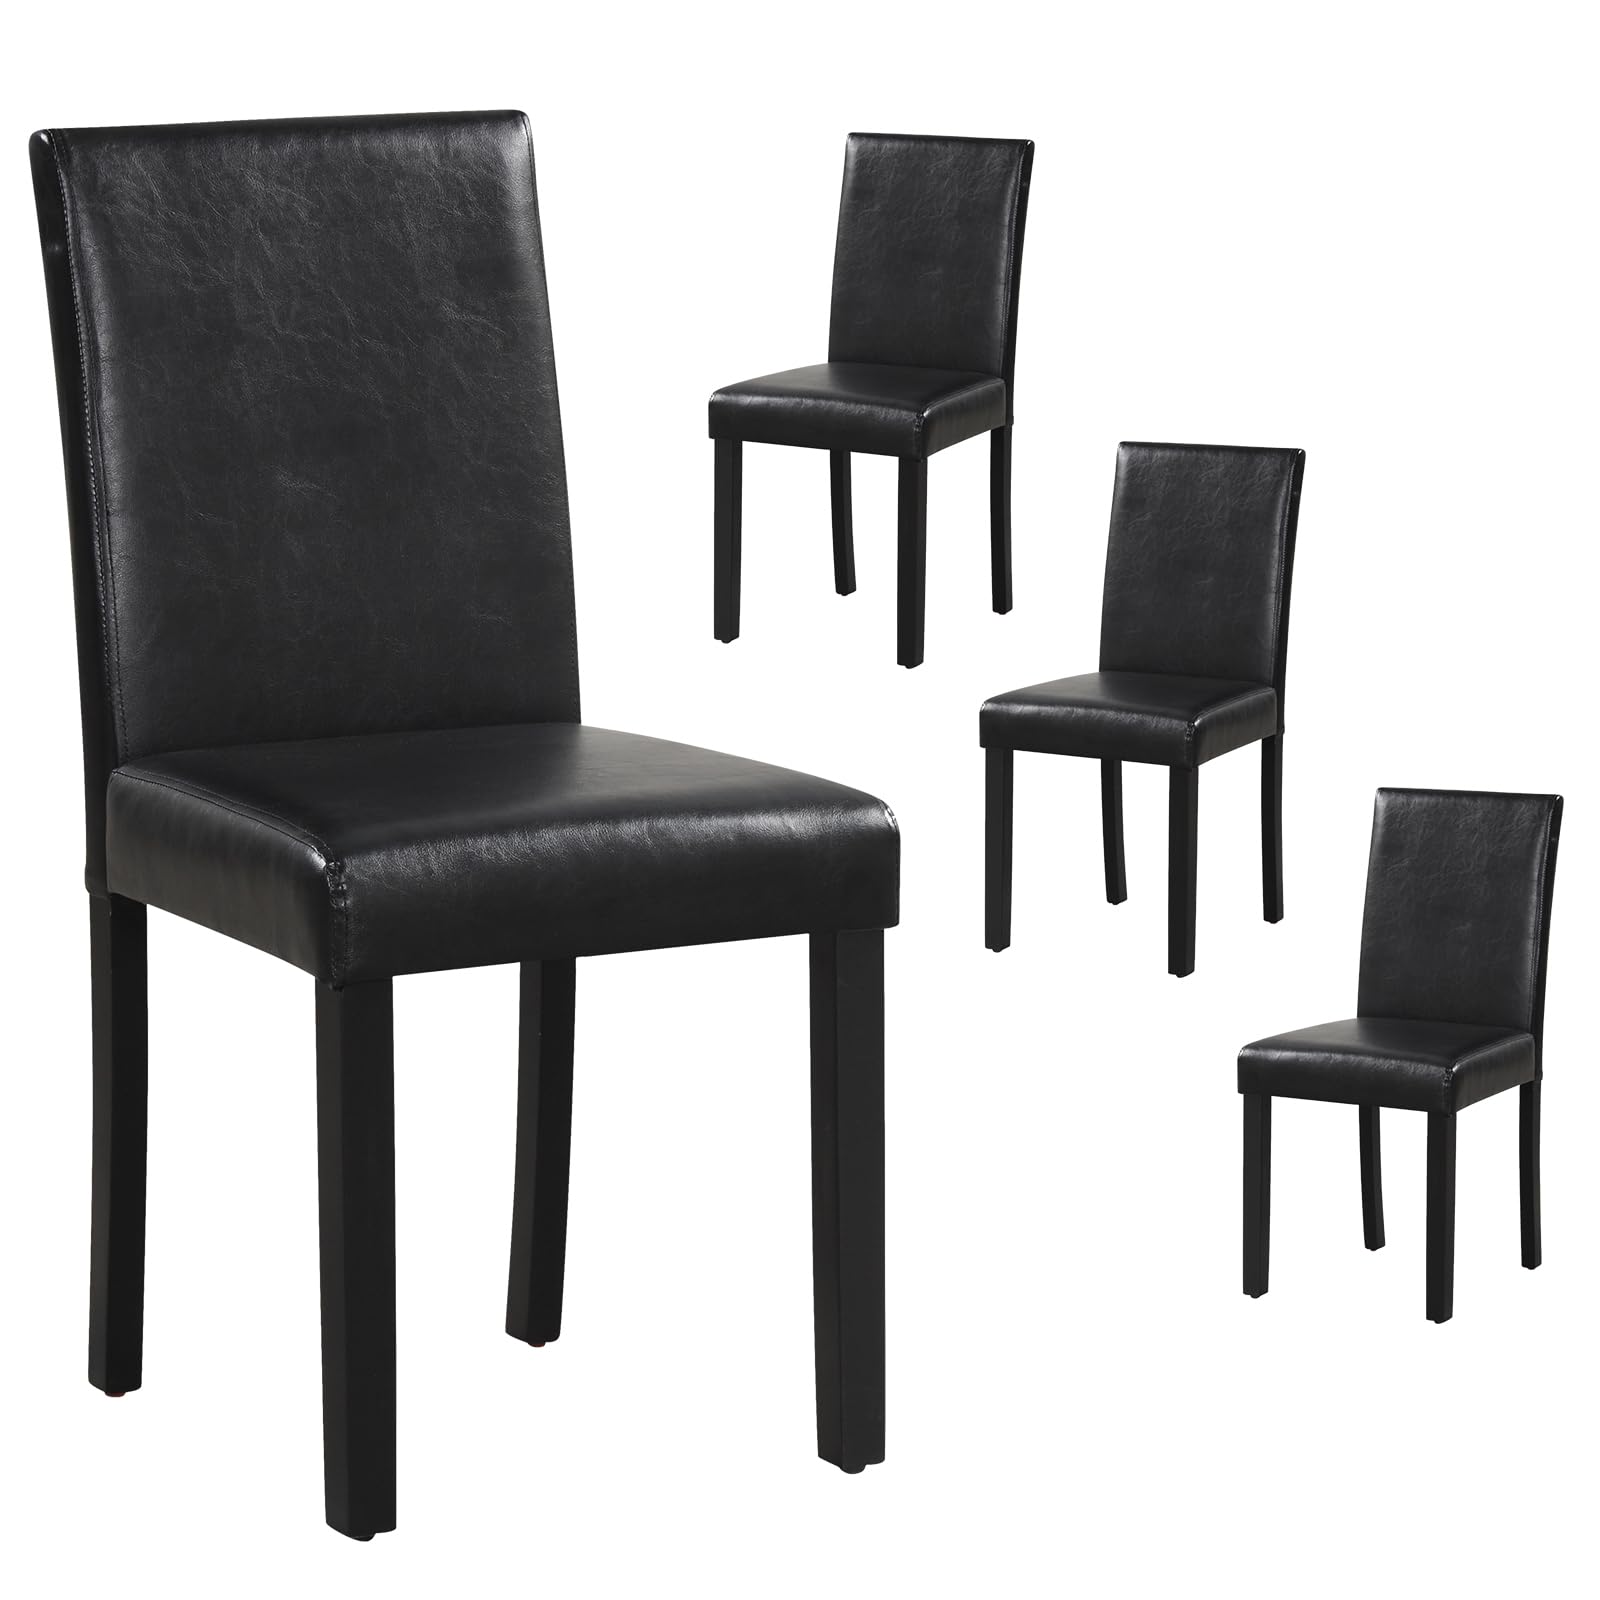 Giantex Dining Chairs Set of 4, Upholstered Kitchen Dinette Chairs w/Wood Frame